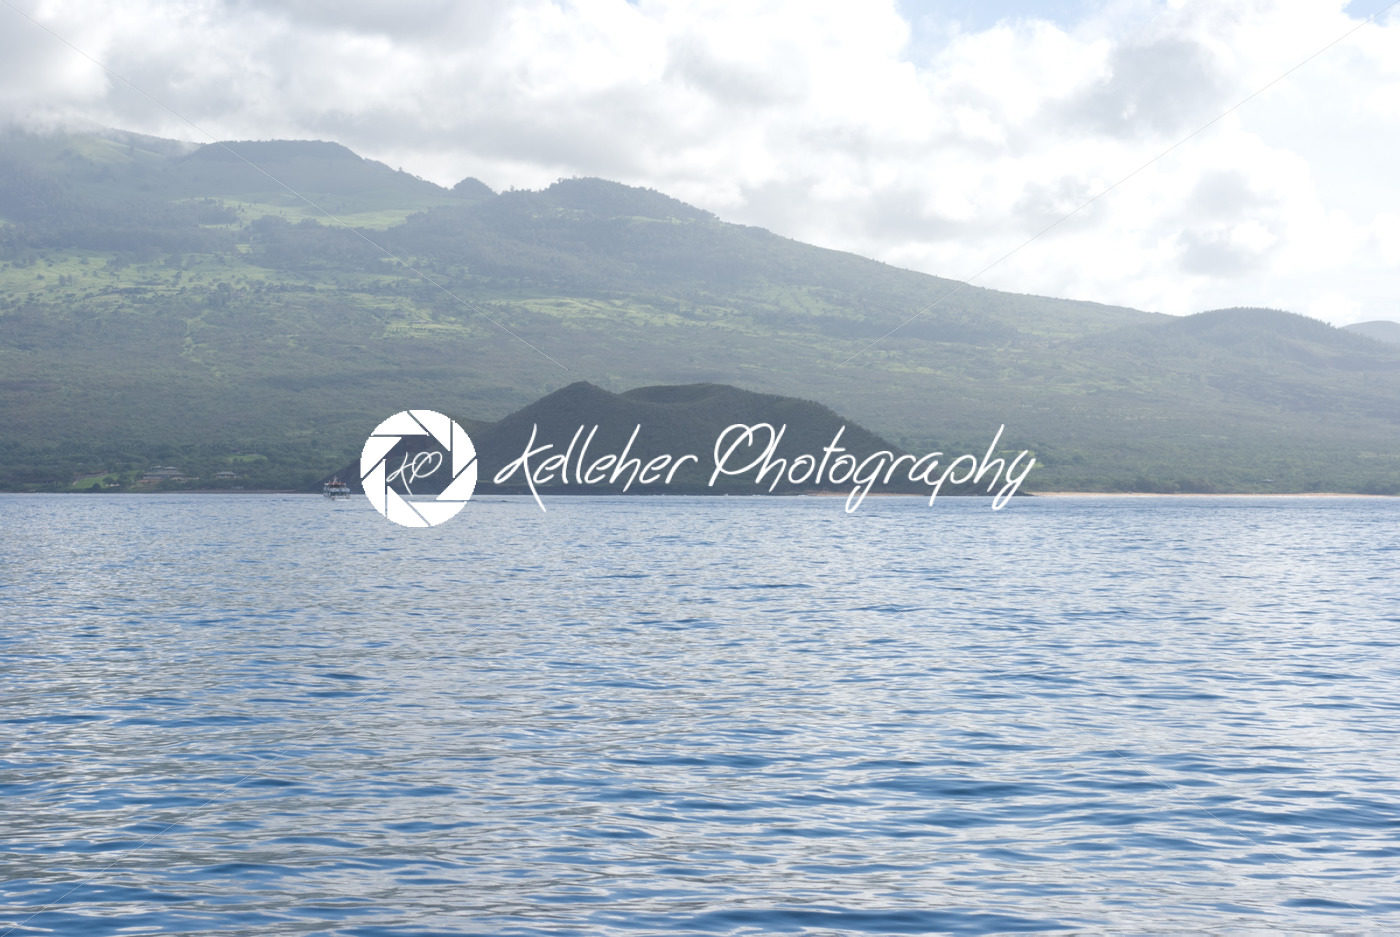 Maui with Molokini Crater. Molokini is popular for scuba diving and snorkeling - Kelleher Photography Store